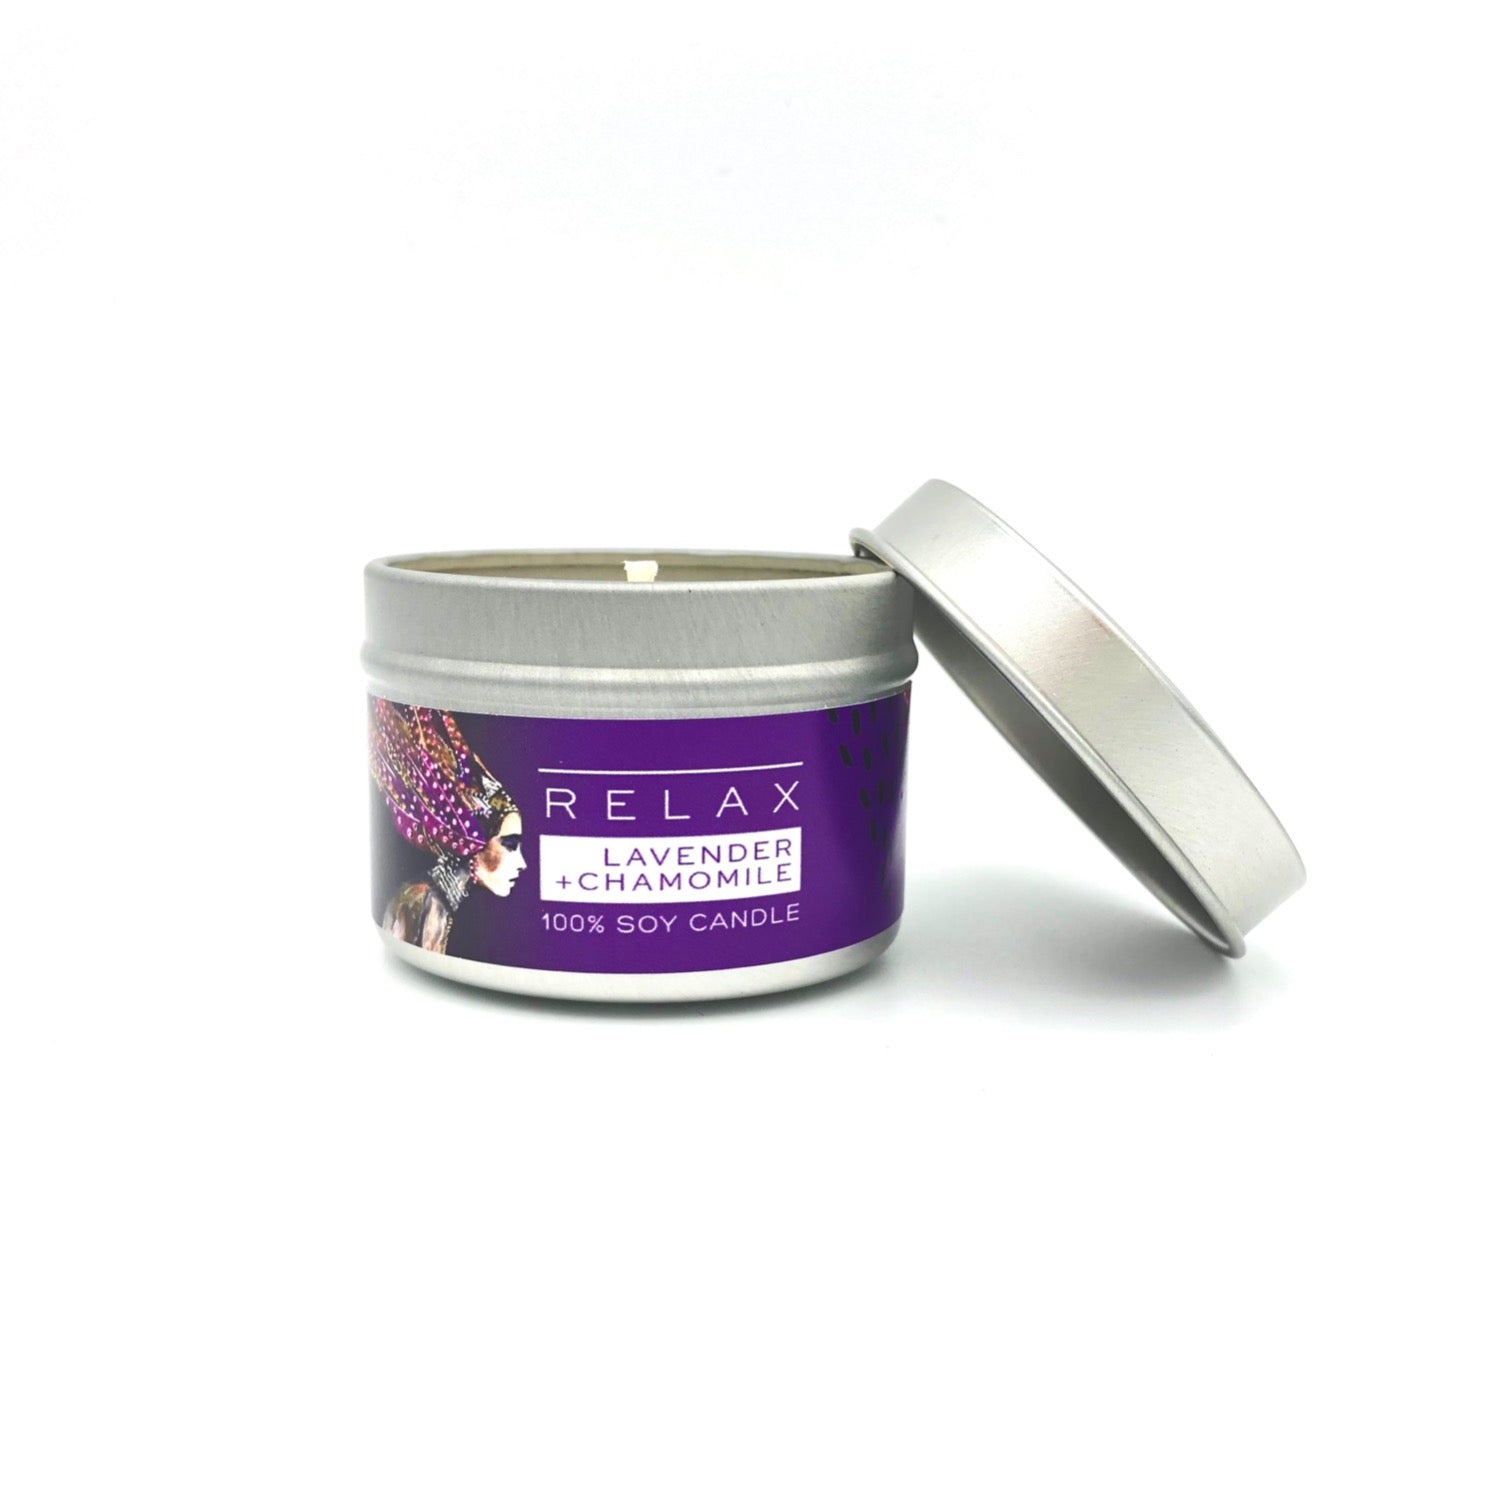 Artful Scents Lavender and Chamomile soy candle